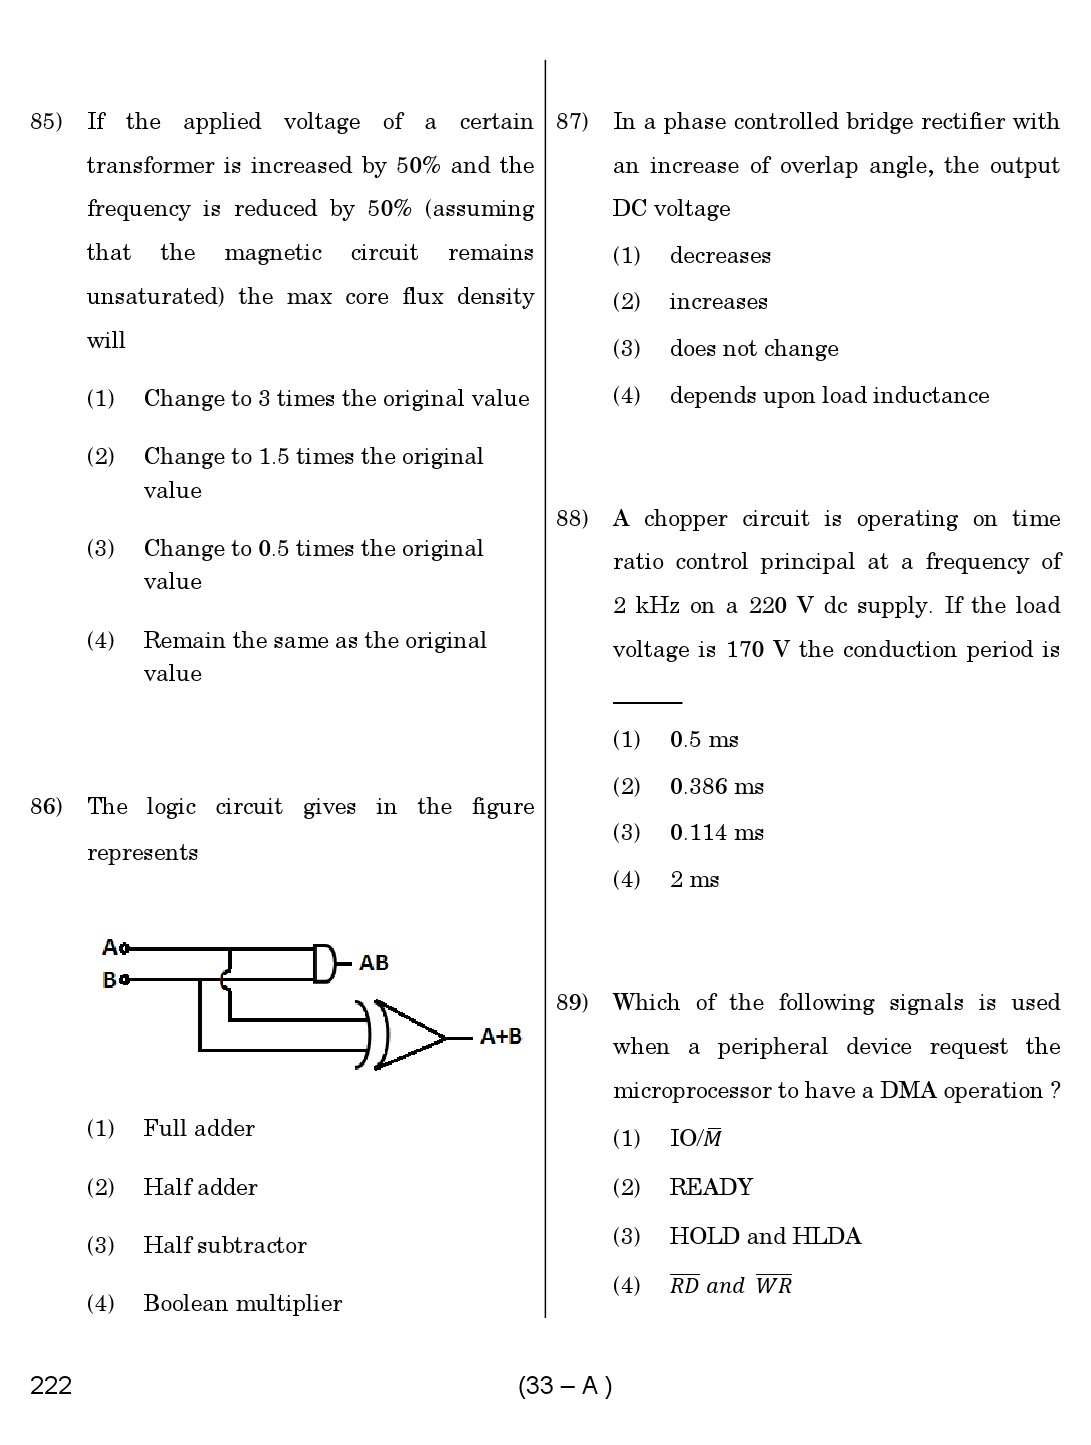 Karnataka PSC Assistant Engineer Electrical Exam Sample Question Paper 33